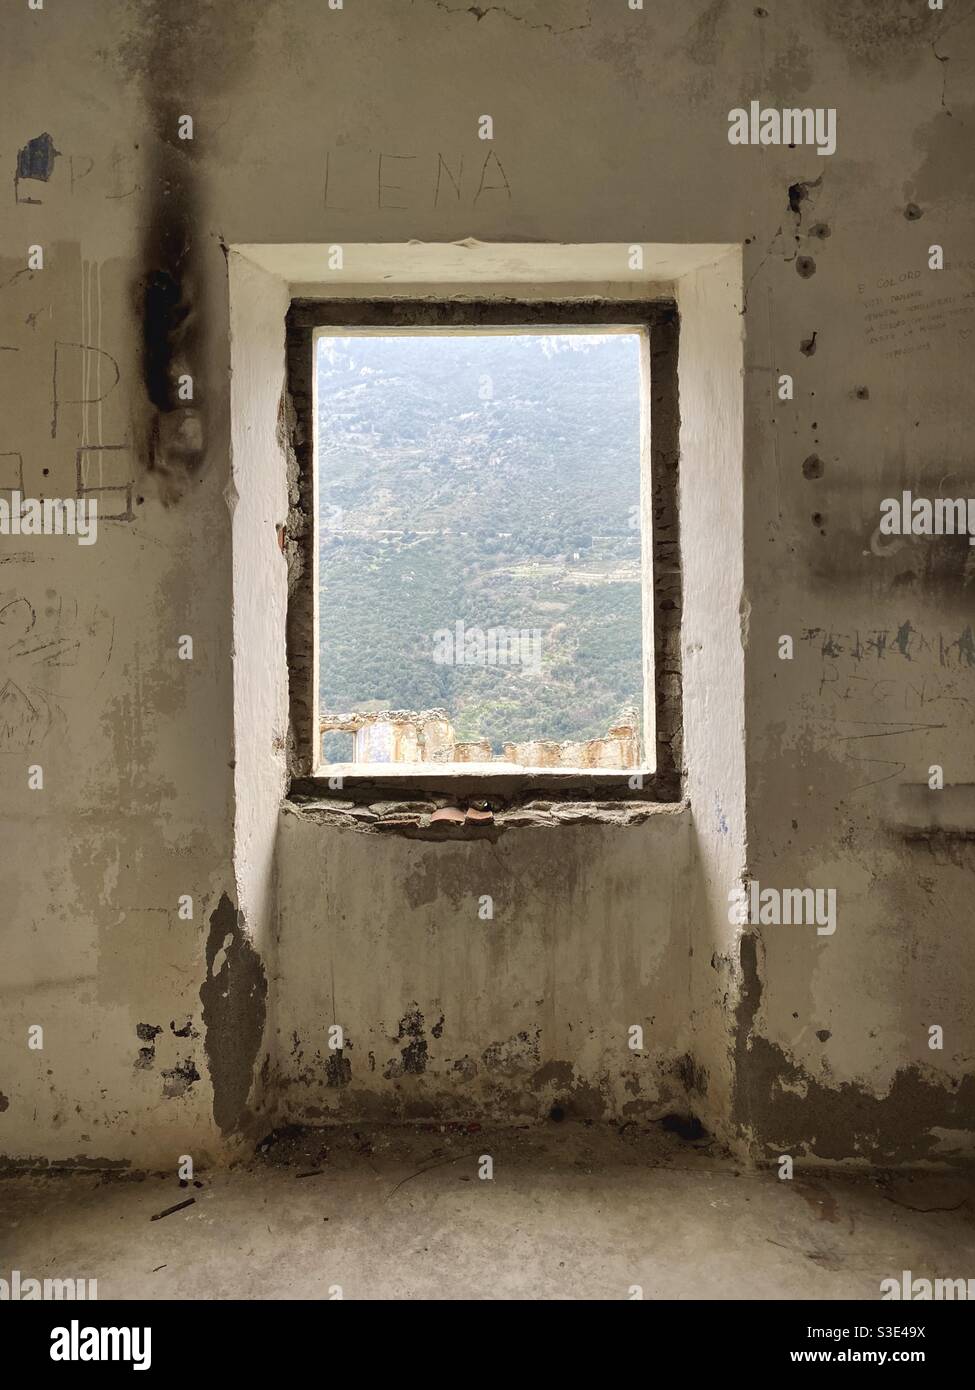 Panoramic view of an abandoned building and green mountains (known as “tacchi”) in the background, from a window of a dismissed and abandoned house of Gairo vecchio ghost town, in Sardinia, Italy. Stock Photo